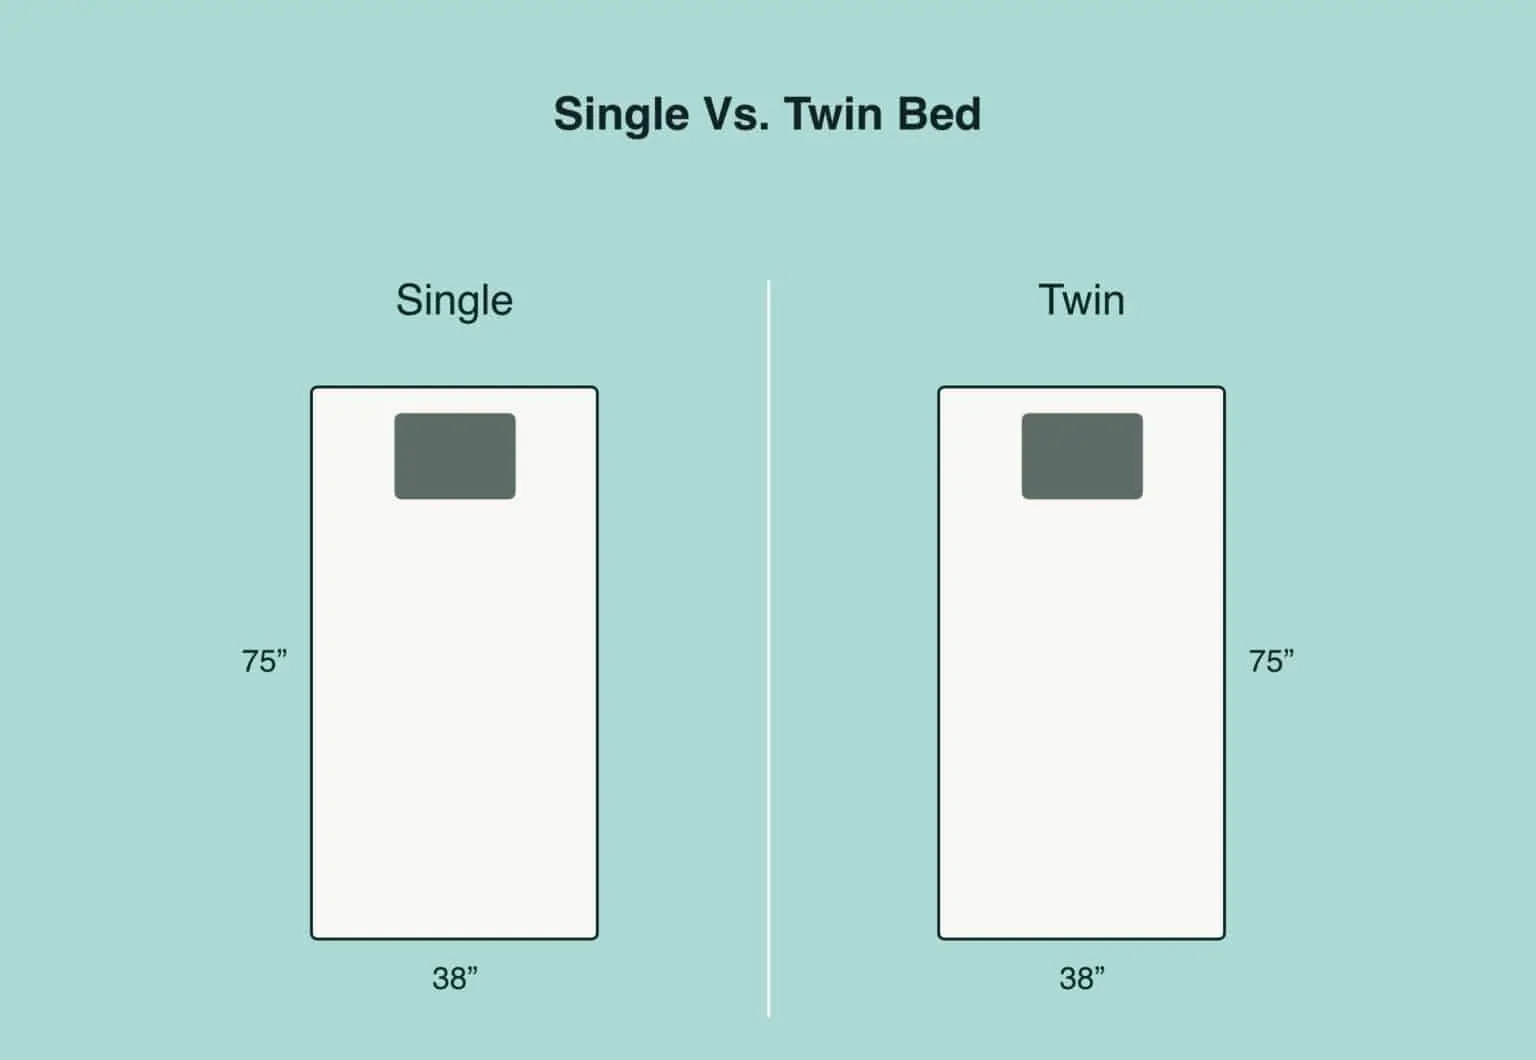 Single vs Twin Bed: What’s the Difference?